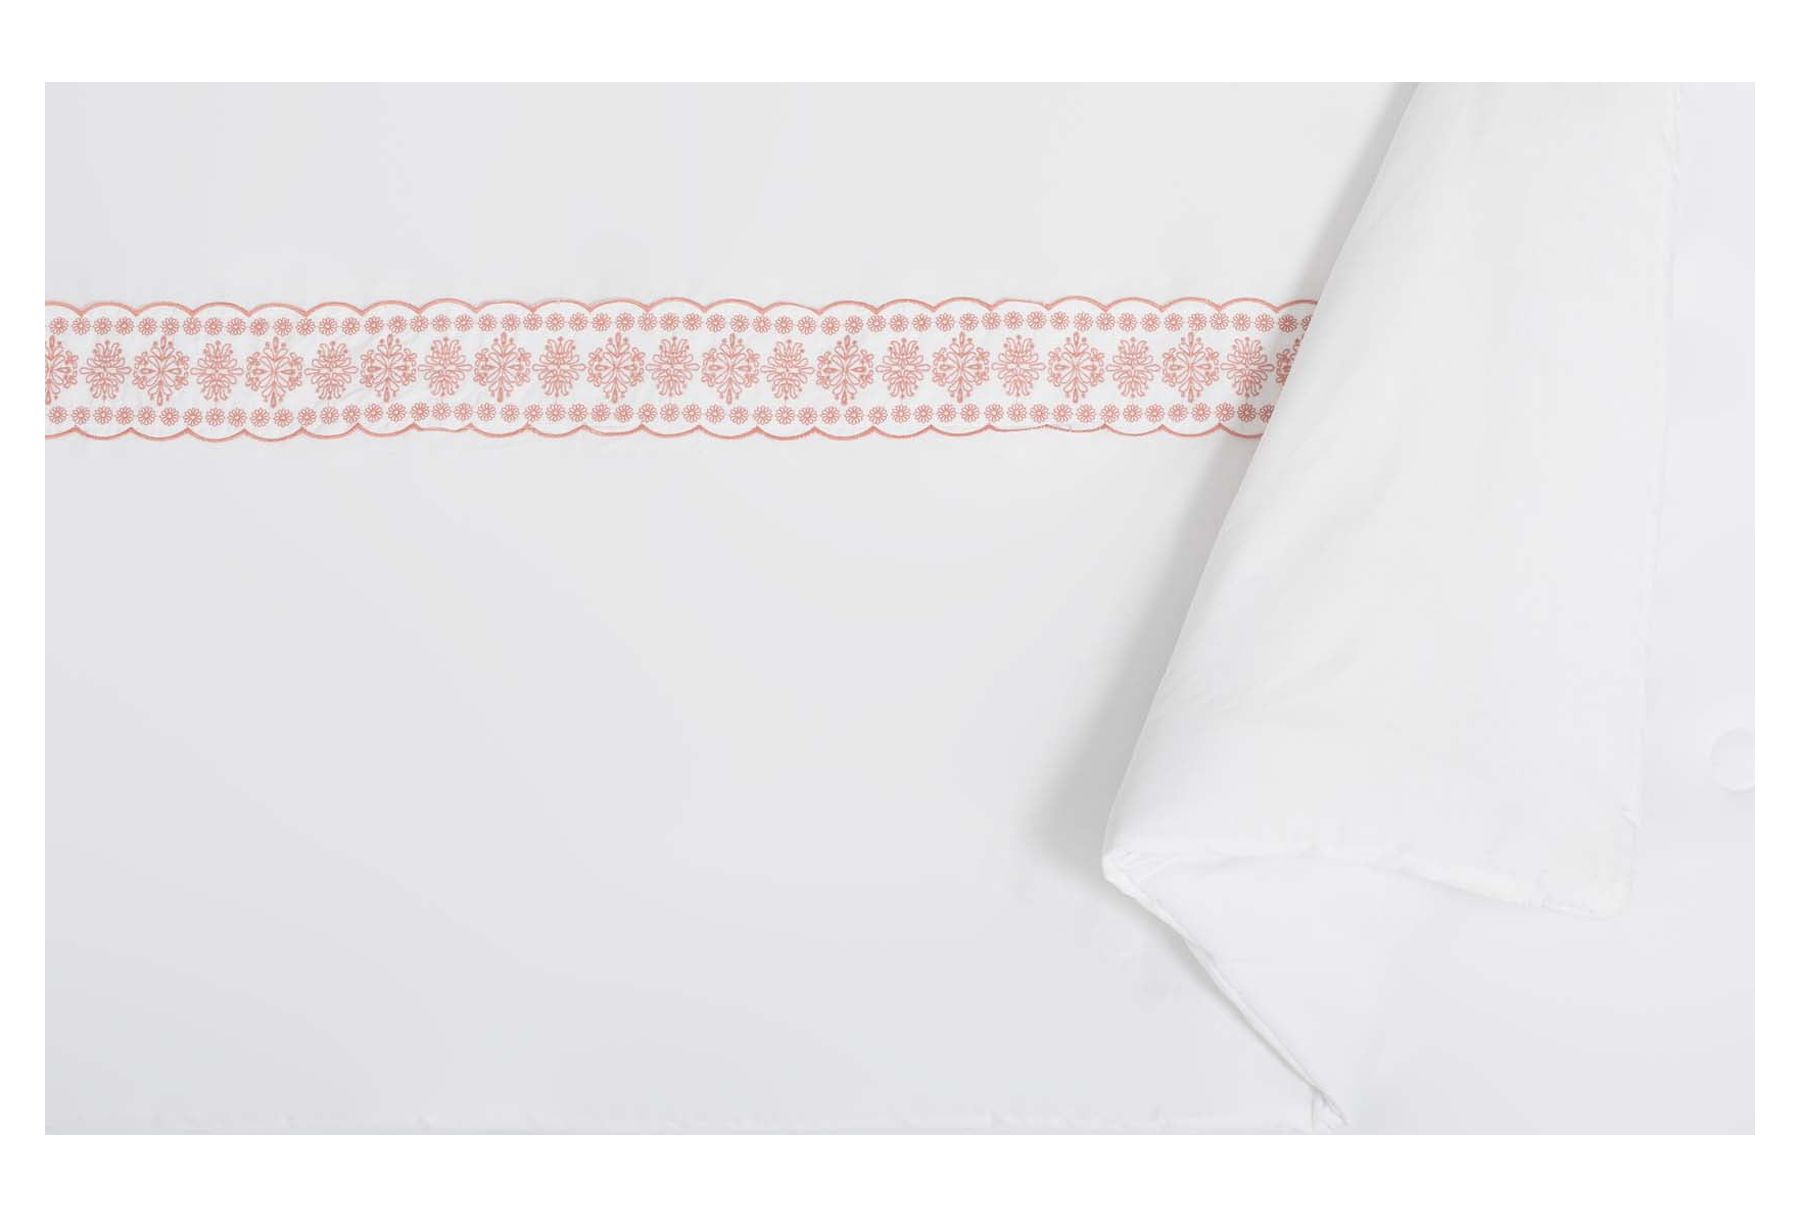 The Pioneer Woman White Cotton Eyelet 4-Piece Comforter Set, Full / Queen - image 8 of 9